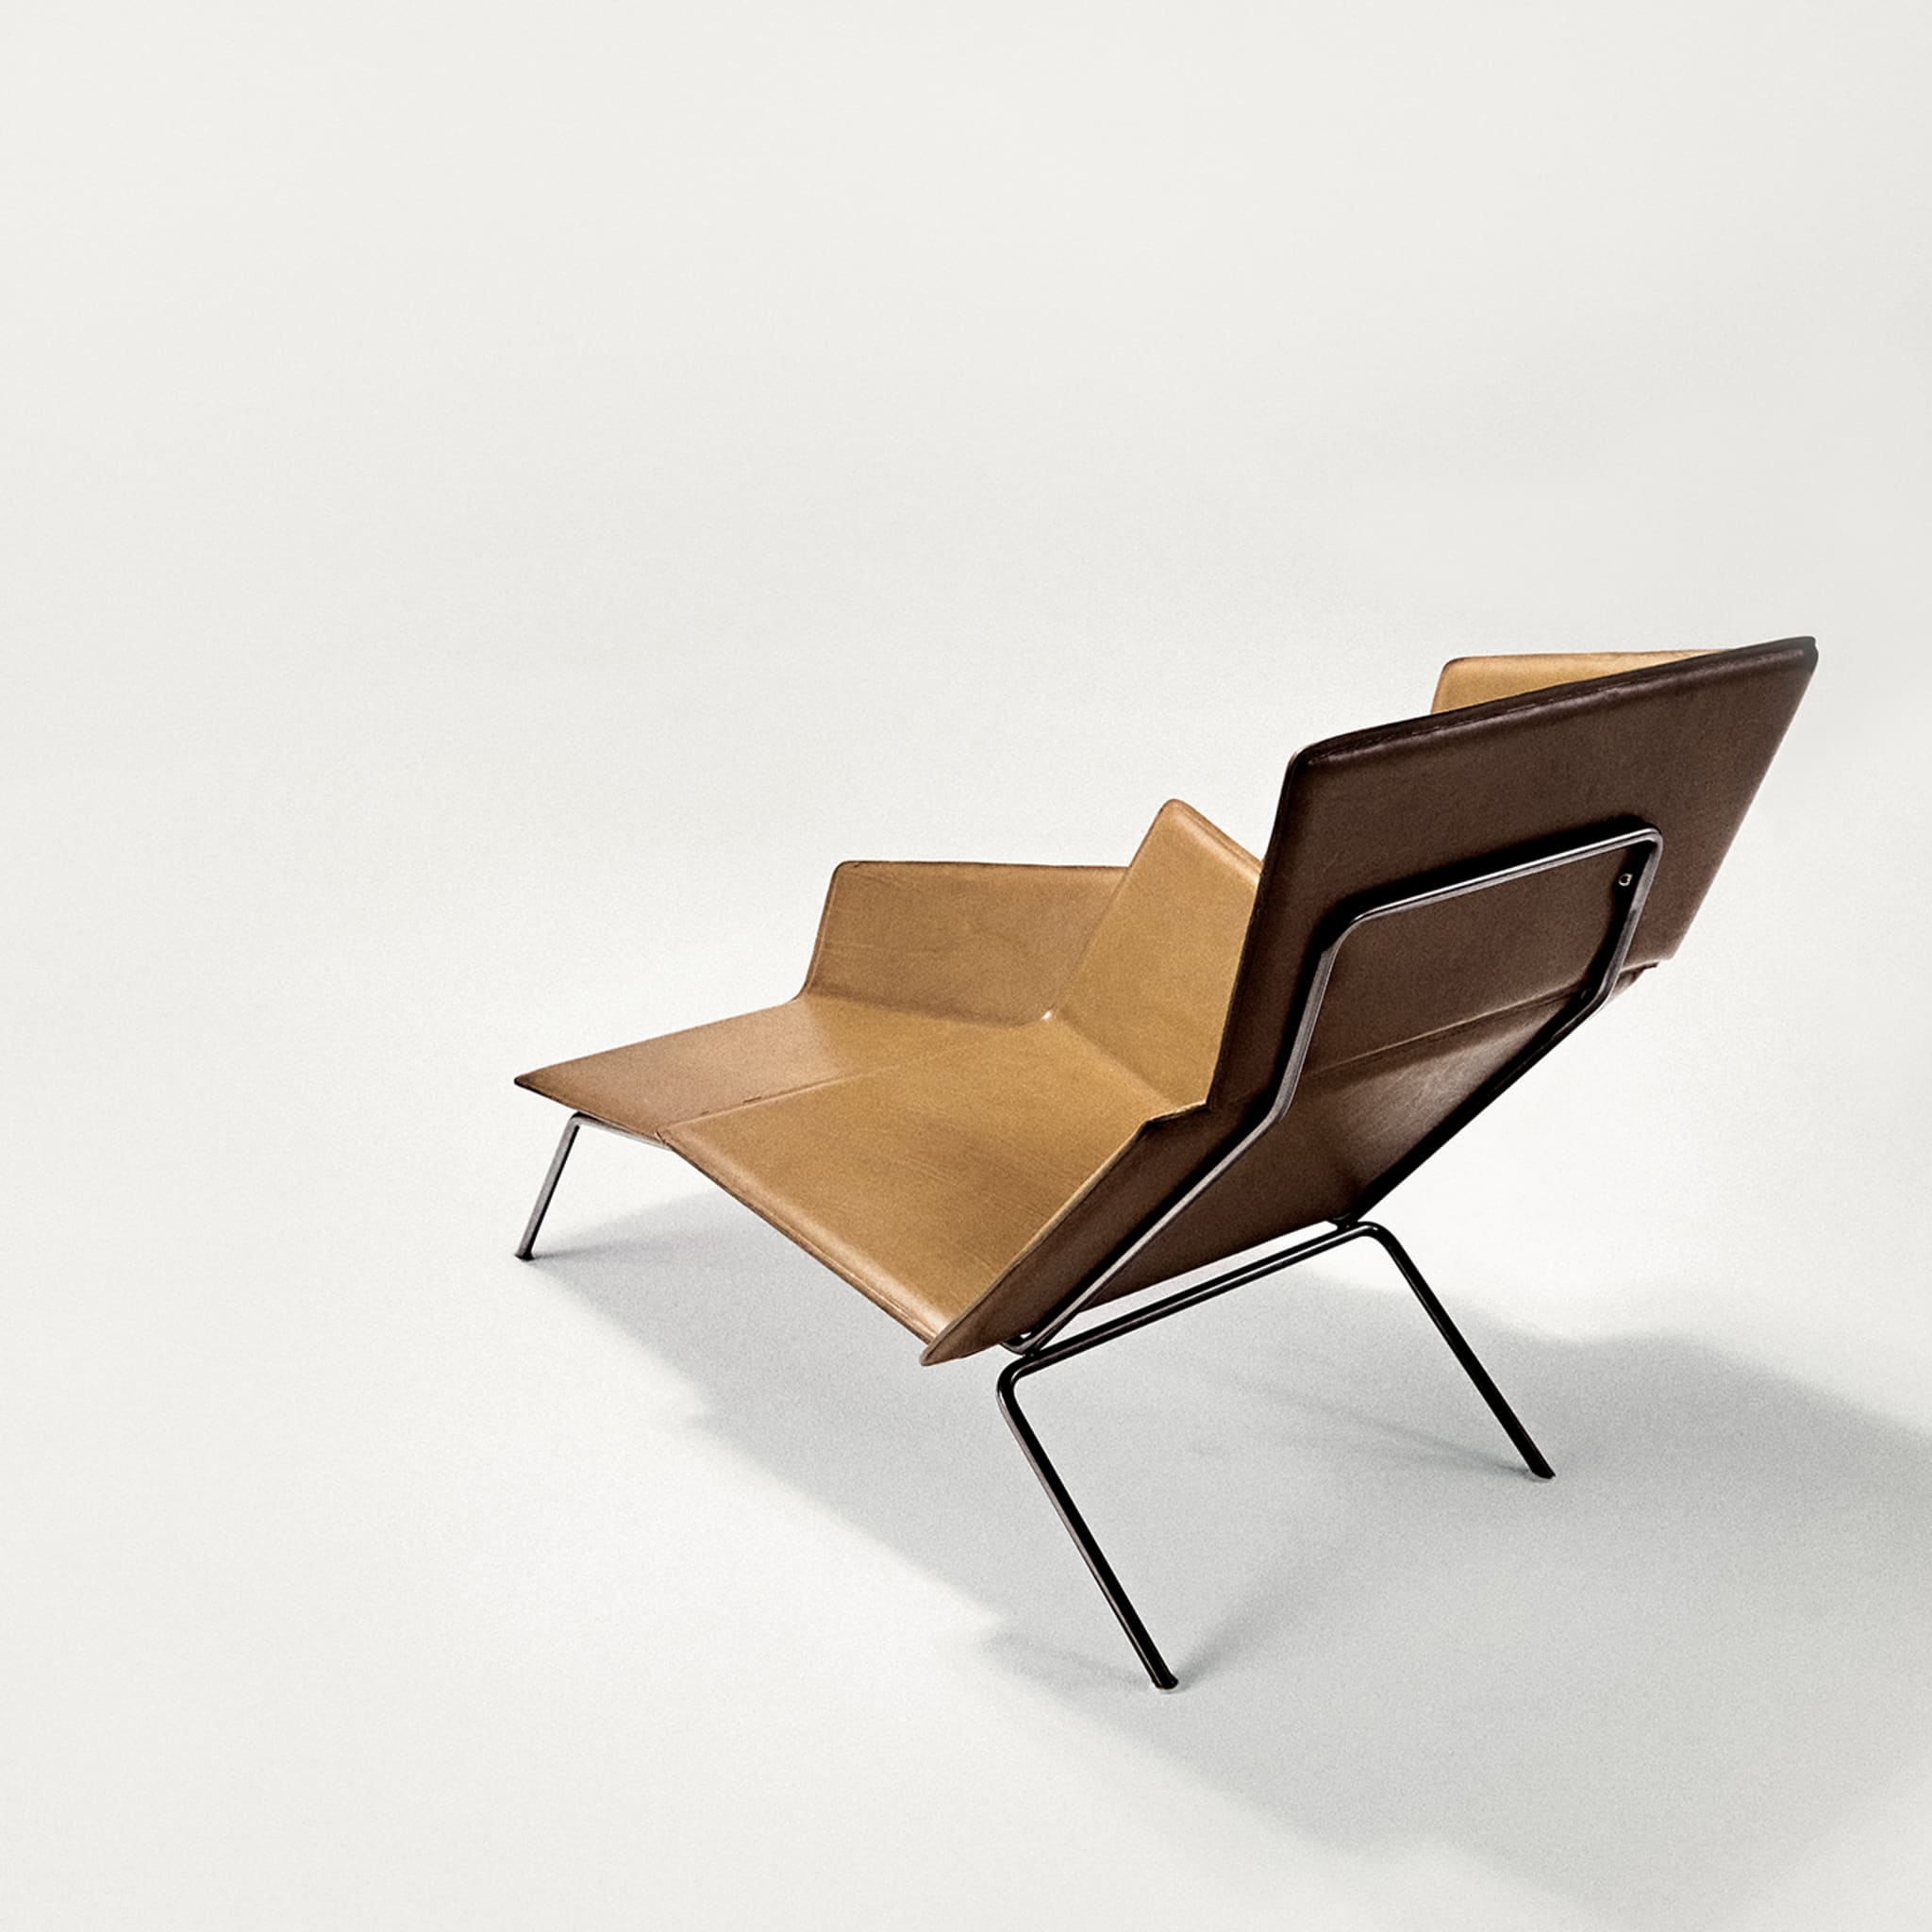 Blade Brown Chaise Longue by Ludovica + Roberto Palomba - Alternative view 1